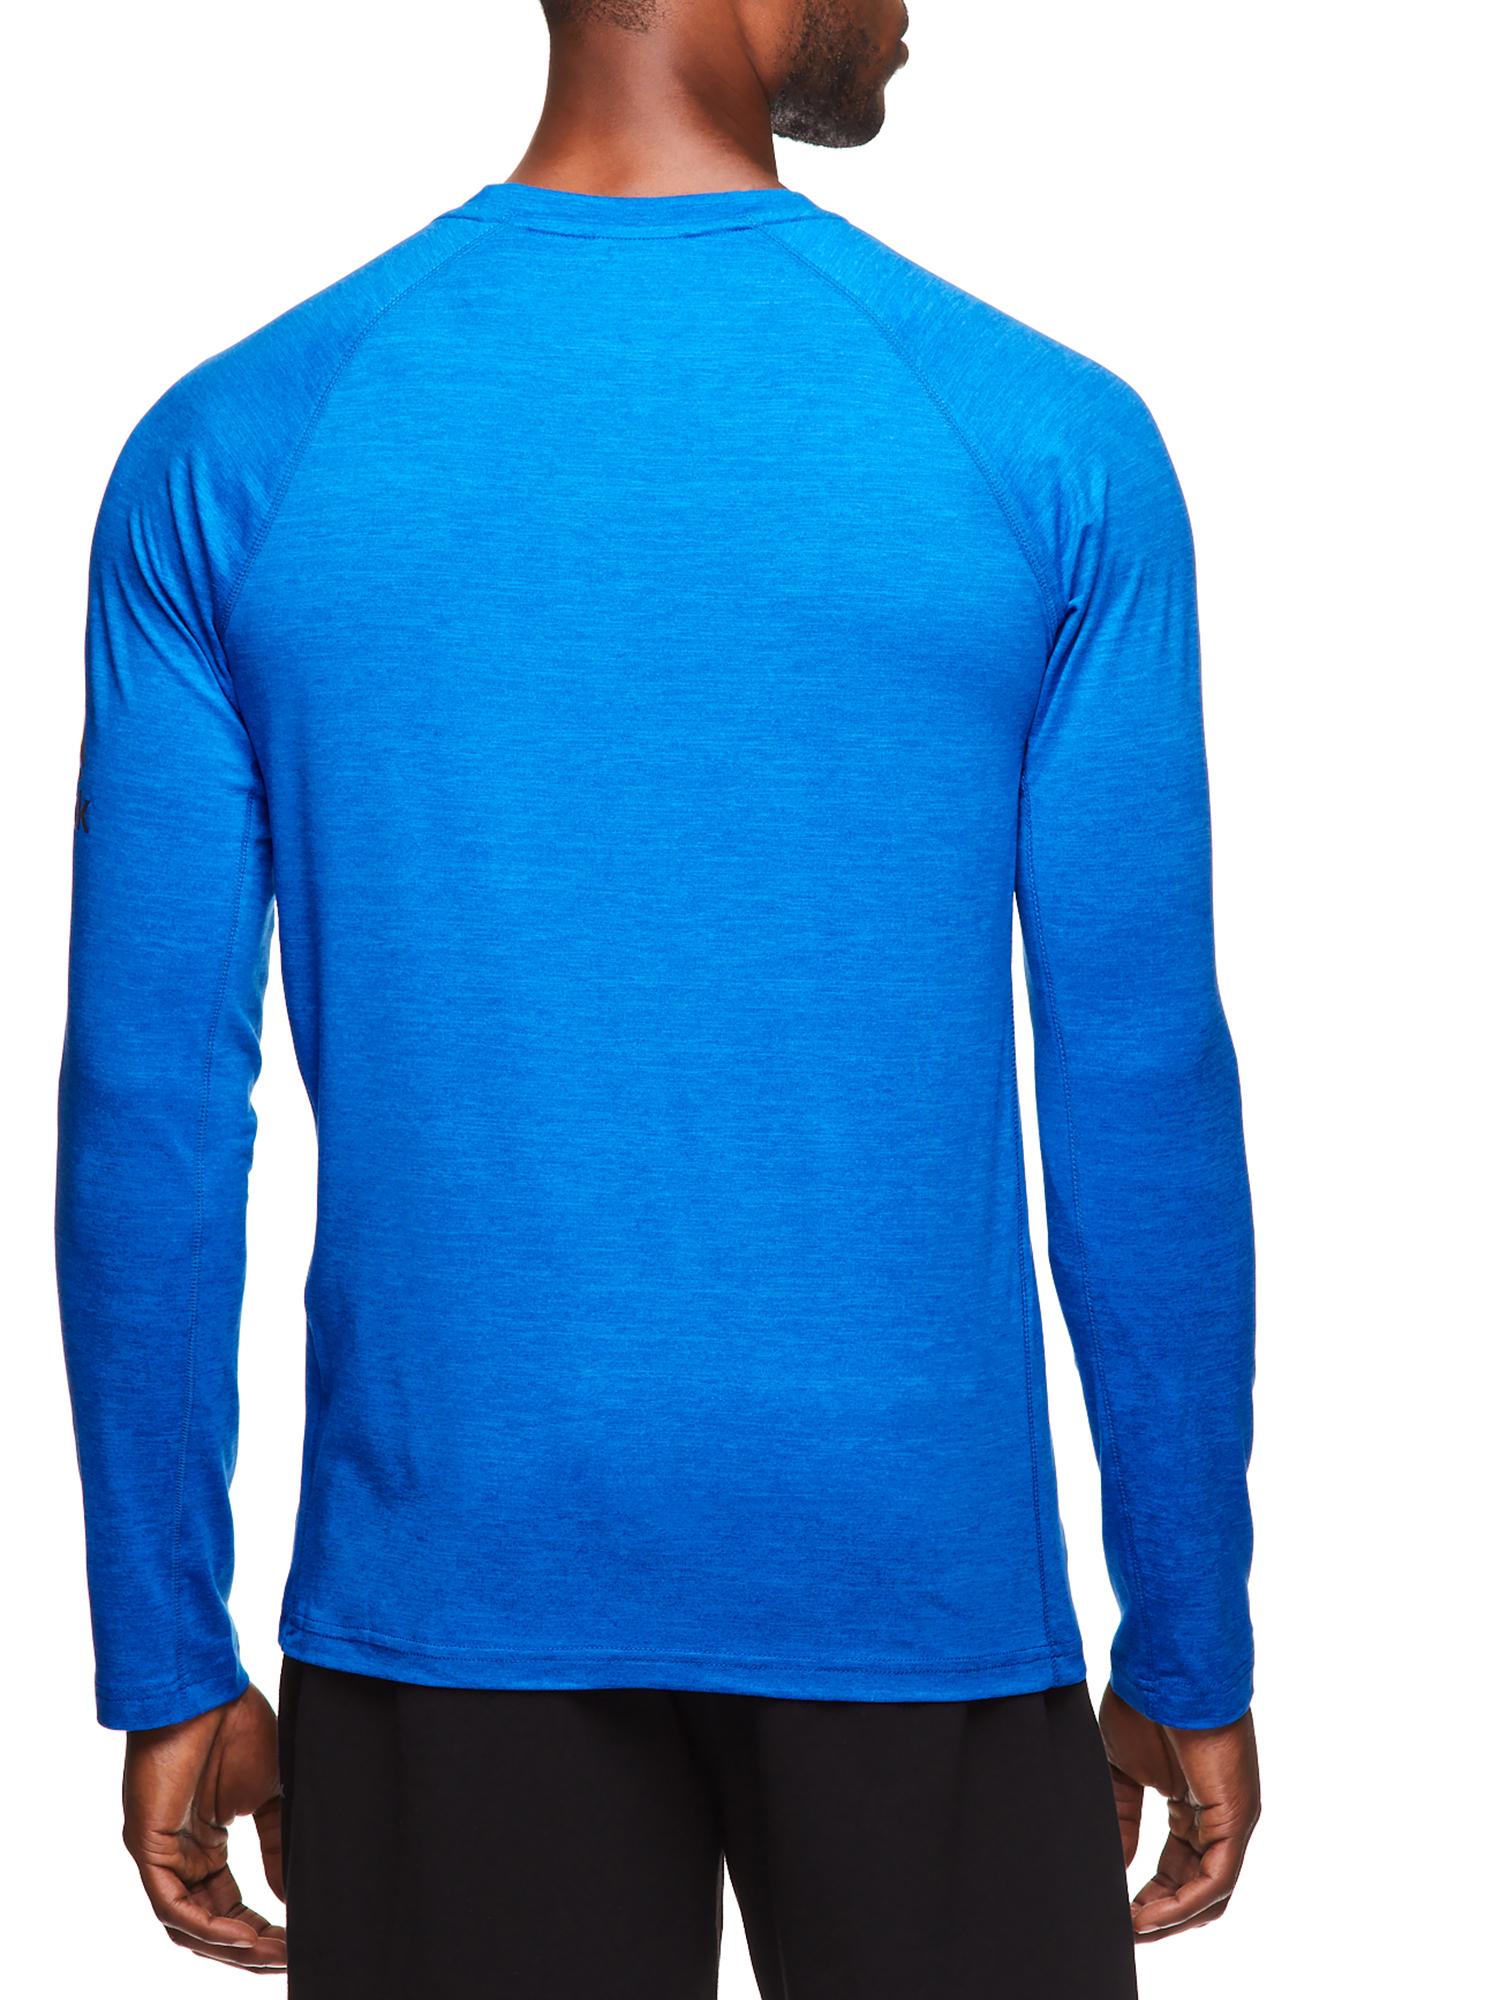 Reebok Men's and Big Men's Active Long Sleeve Warm-Up Training Crew, up to Size 3XL - image 2 of 4